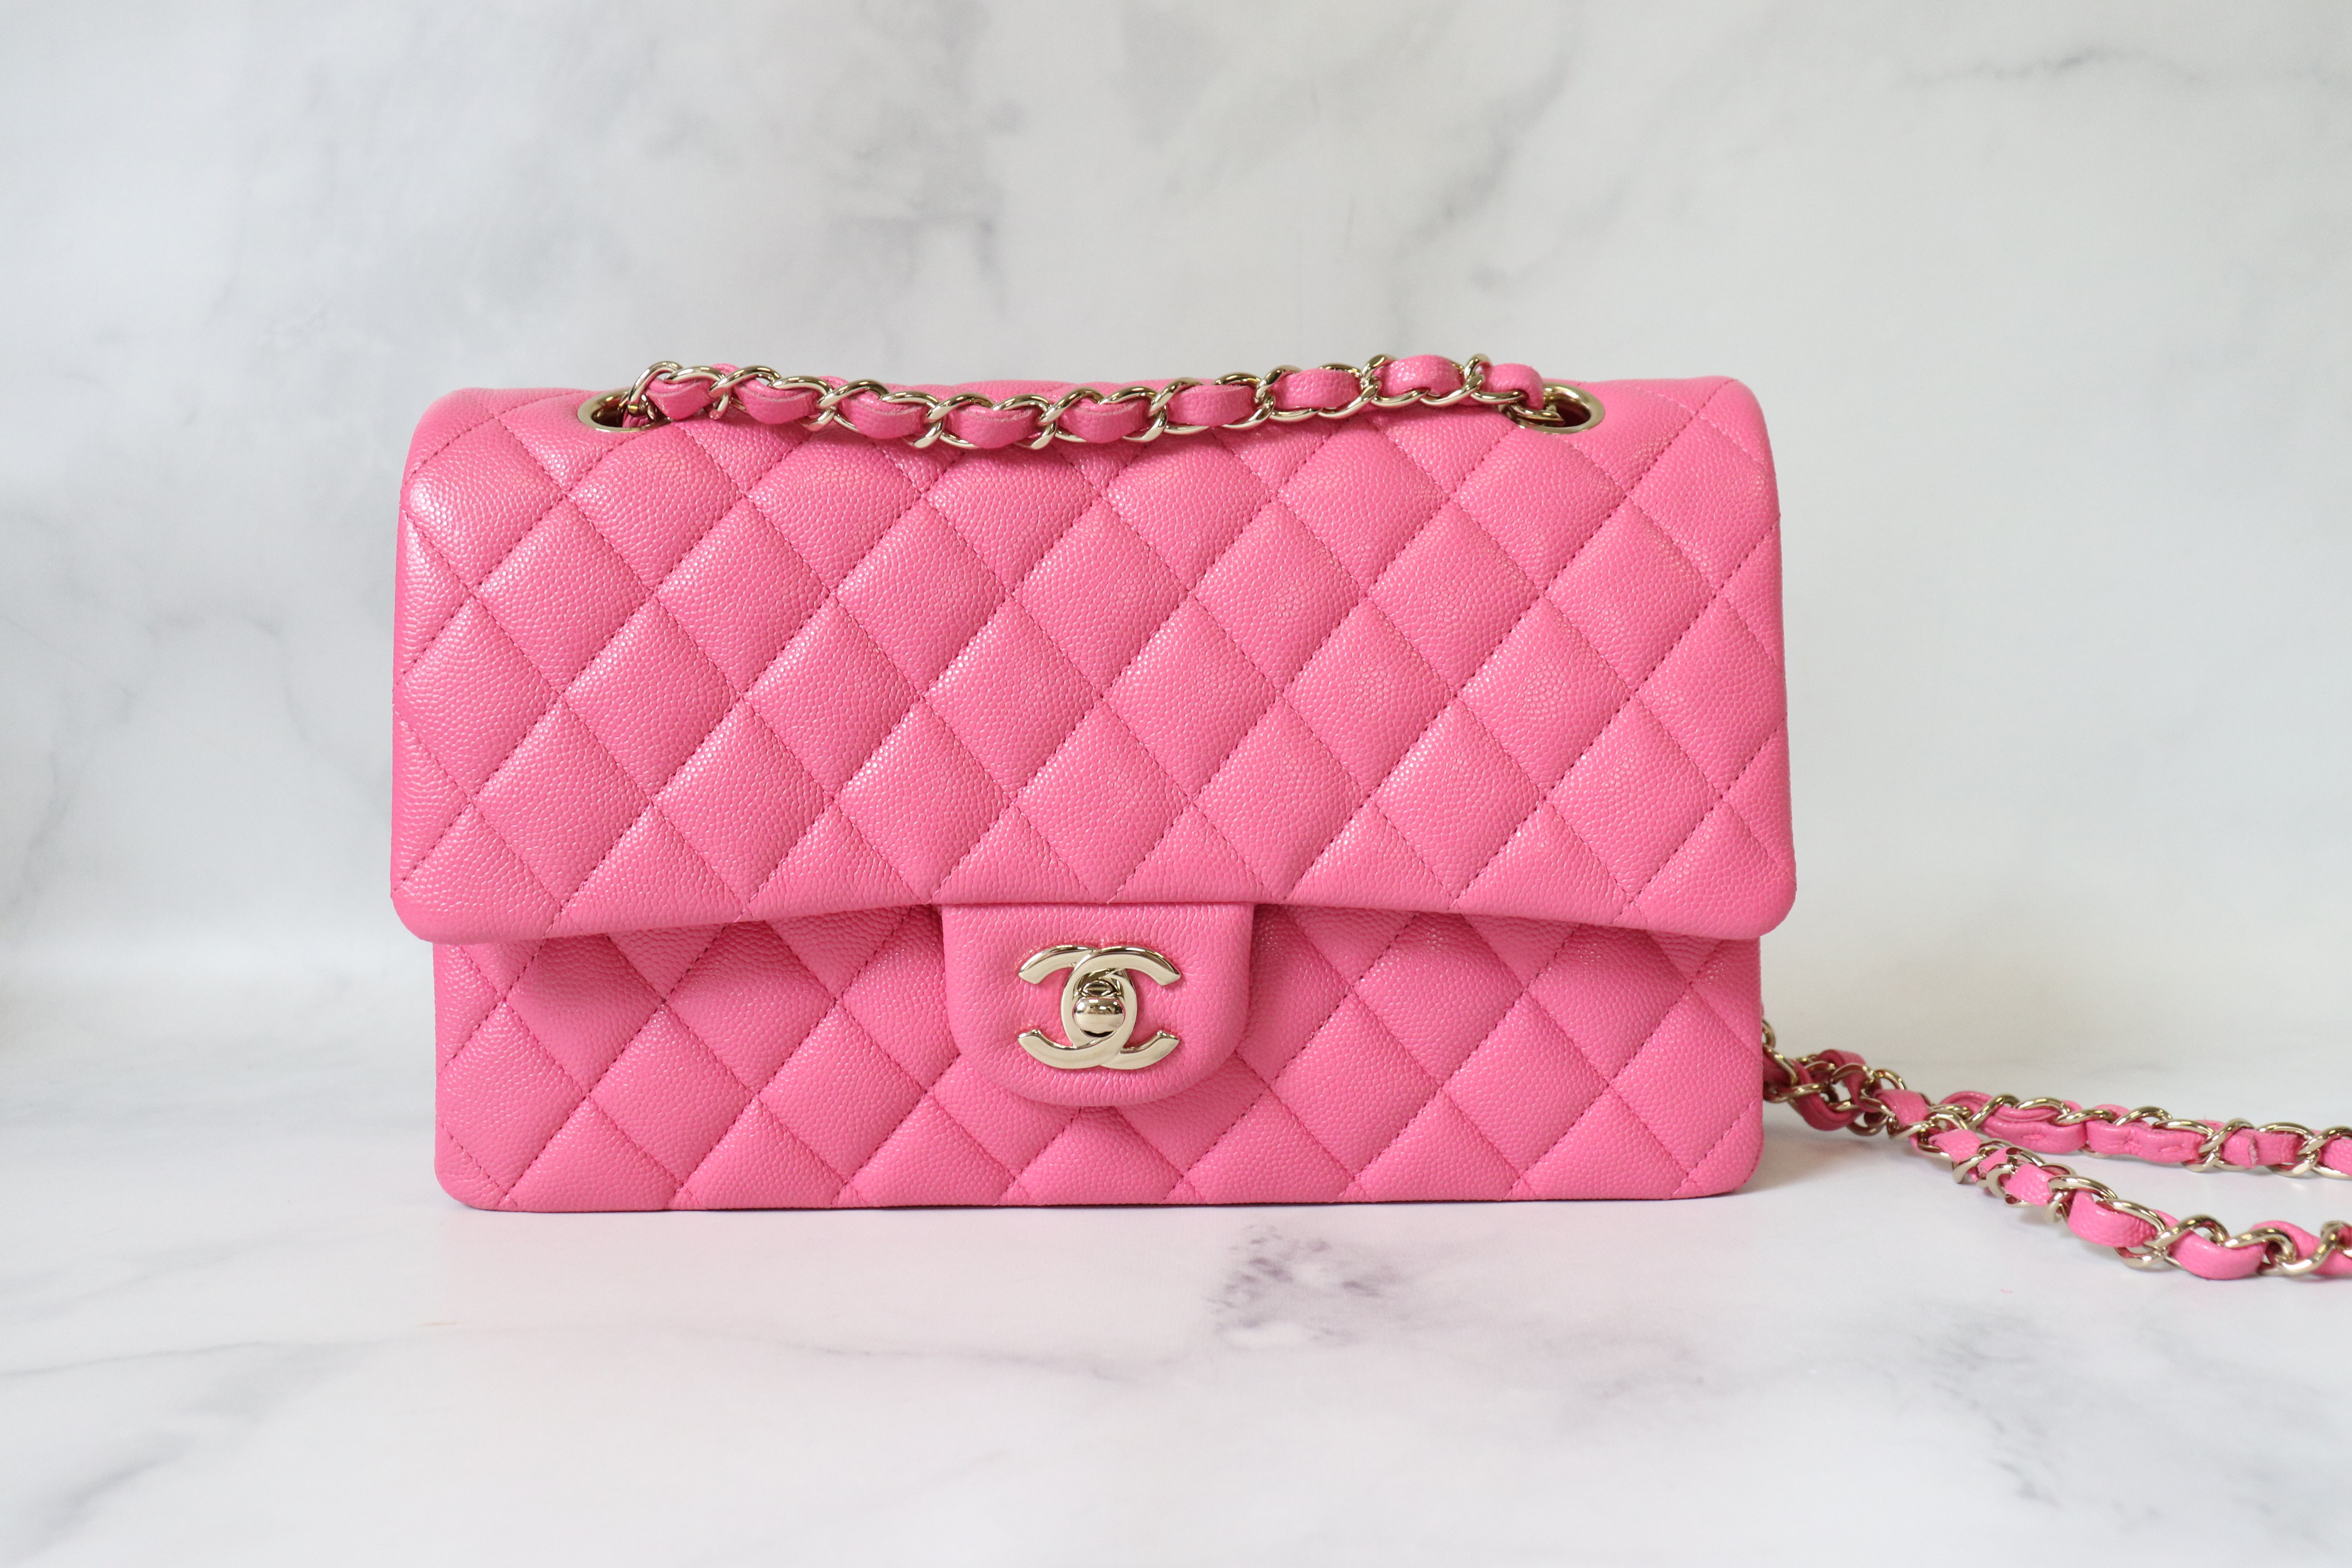 Chanel Classic Medium Double Flap, 21C Pink Caviar Leather, Gold